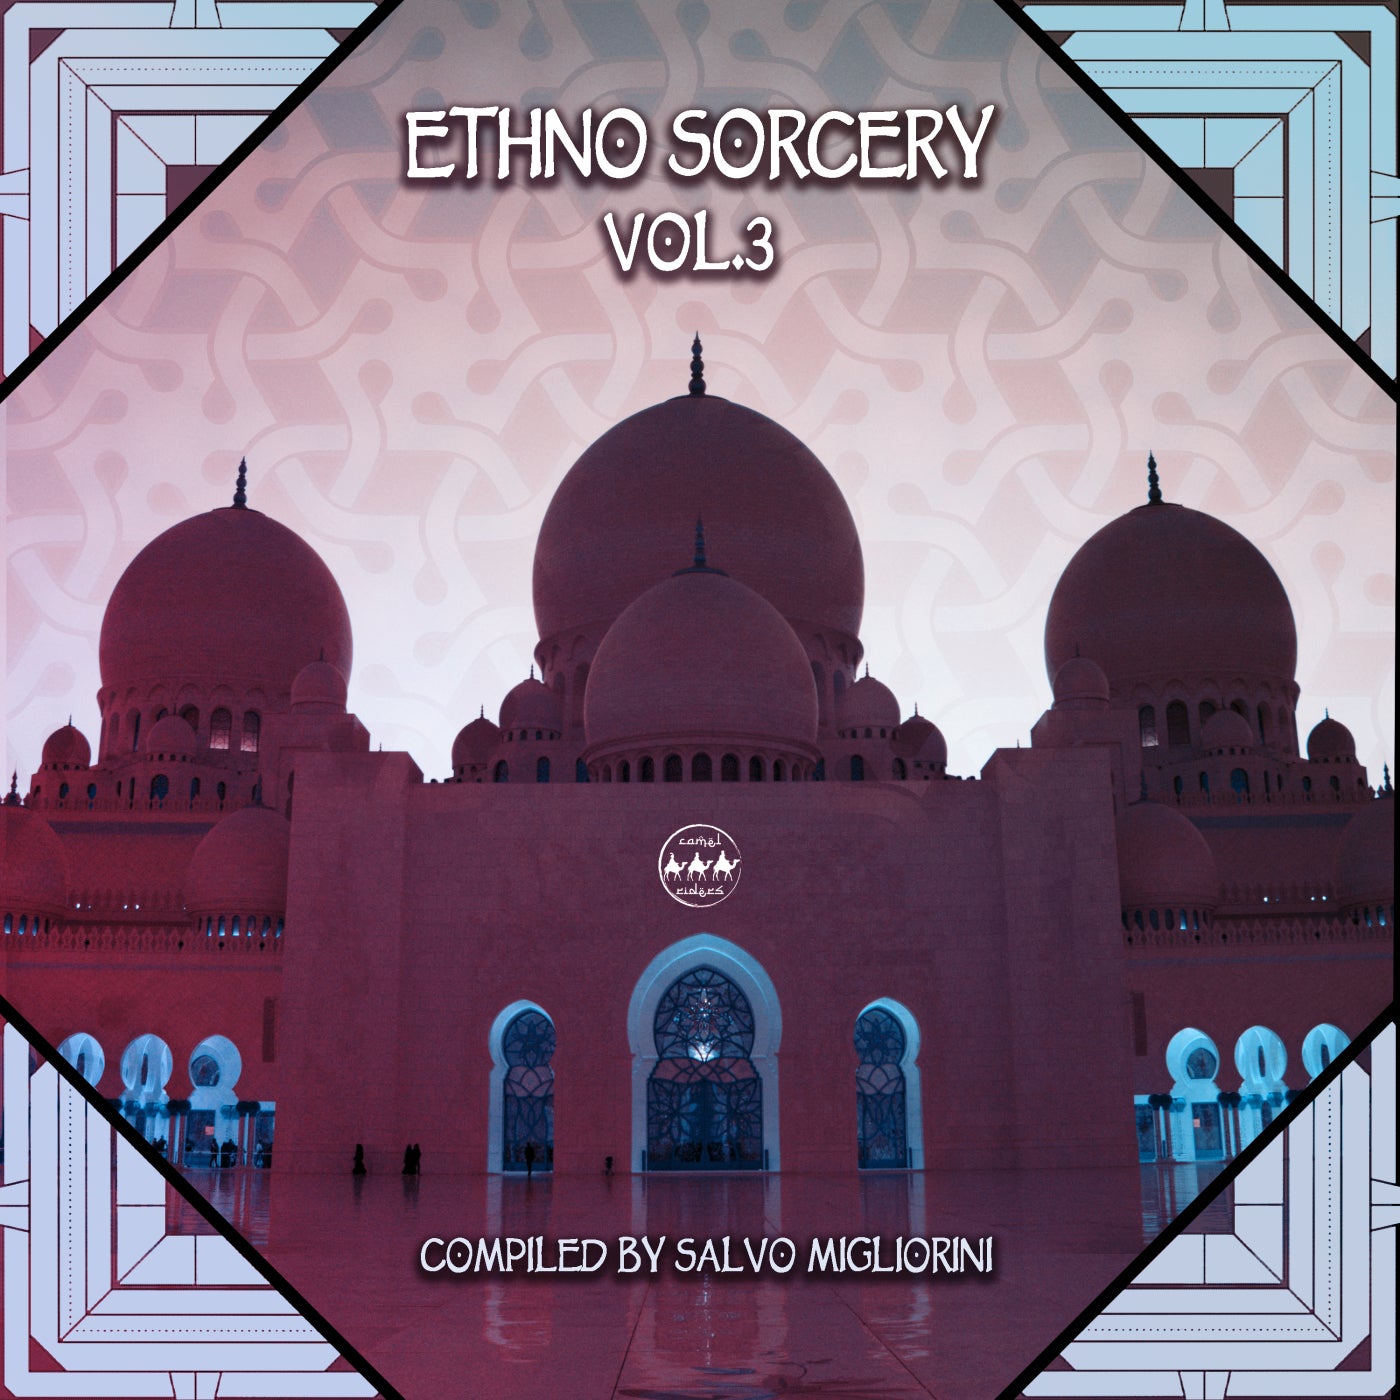 Ethno Sorcery, Vol. 3 (Compiled by Salvo Migliorini)